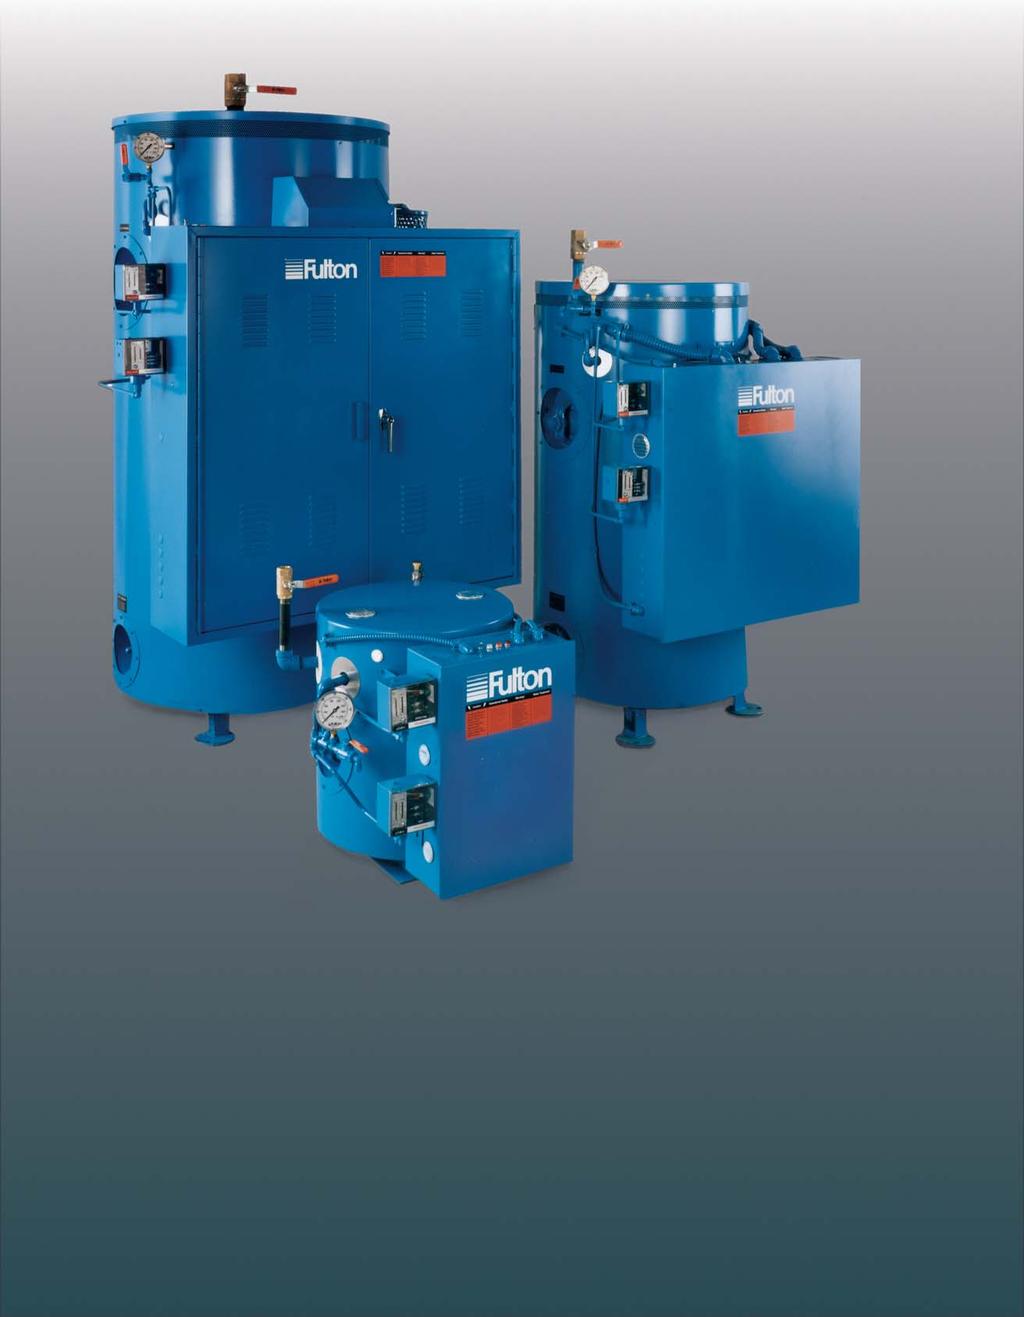 Fulton Electric Steam Boilers Are Efficient, Quiet, And Safe For Your Process Needs Fulton manufactures a complete line of electric steam boilers from 12 kw to 1000 kw (1.